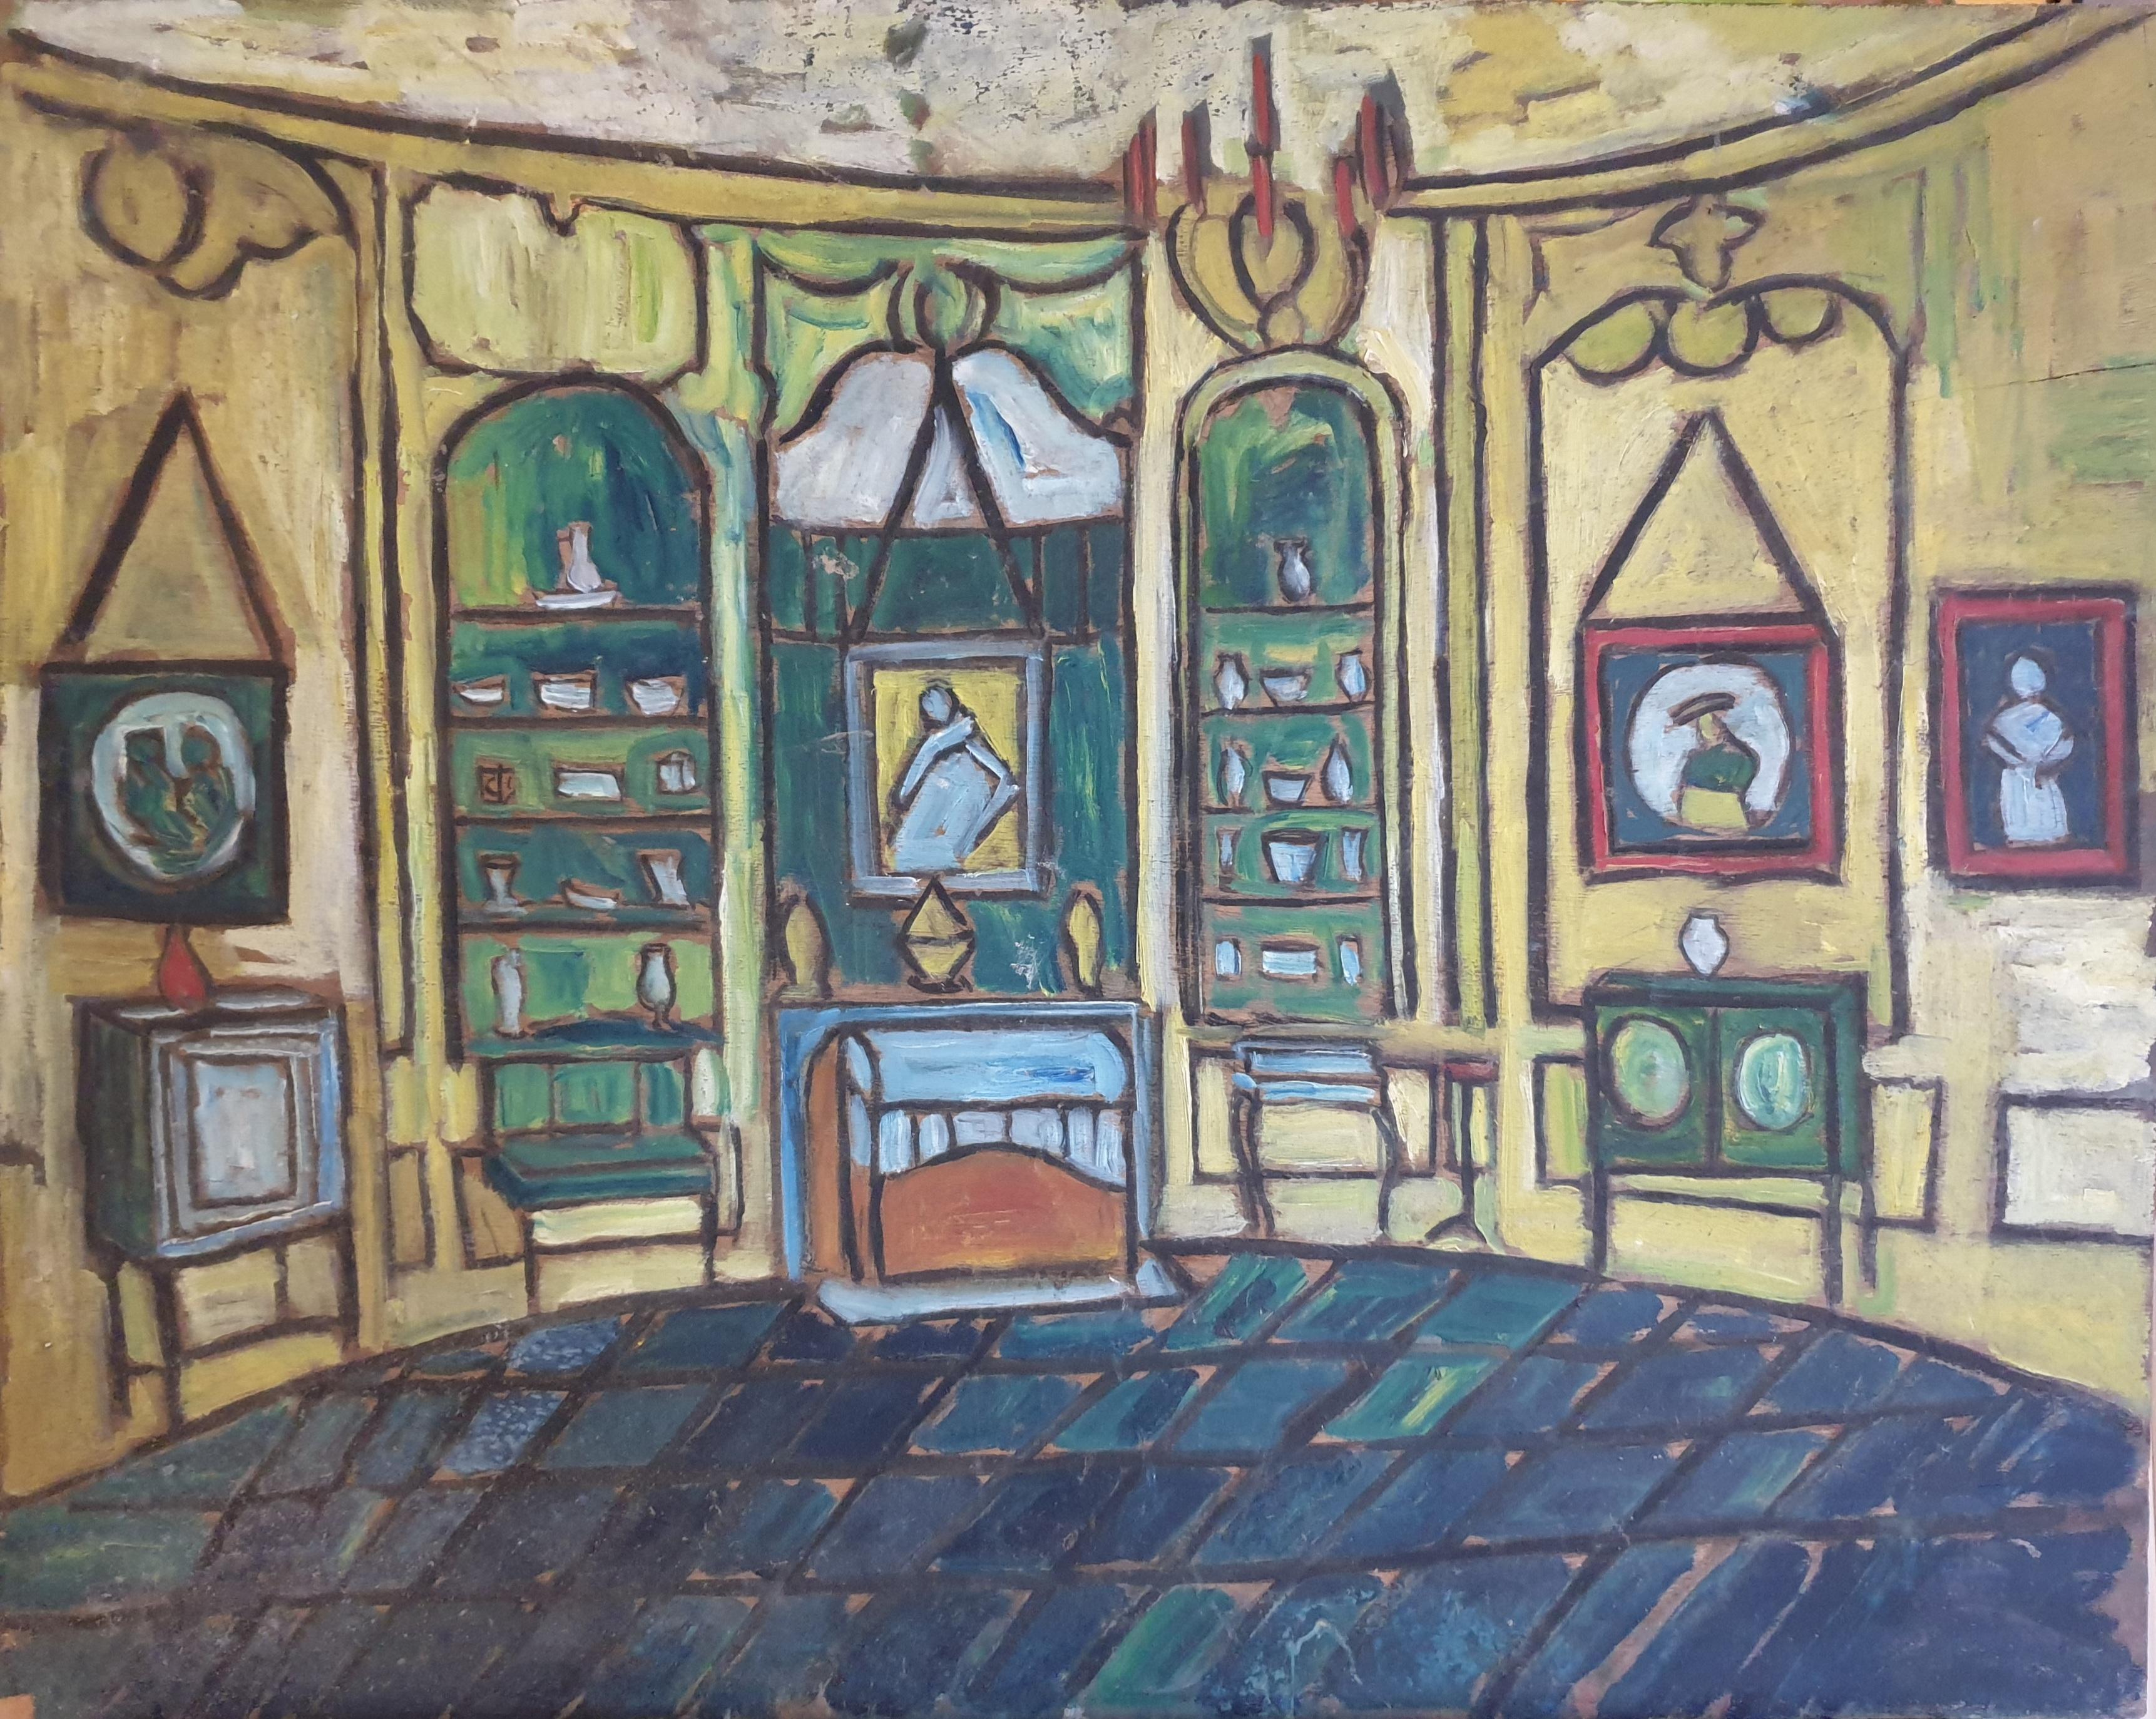 Unknown Interior Painting - The Salon. Naiive Colourful French Chateau Interior, Oil on Board.